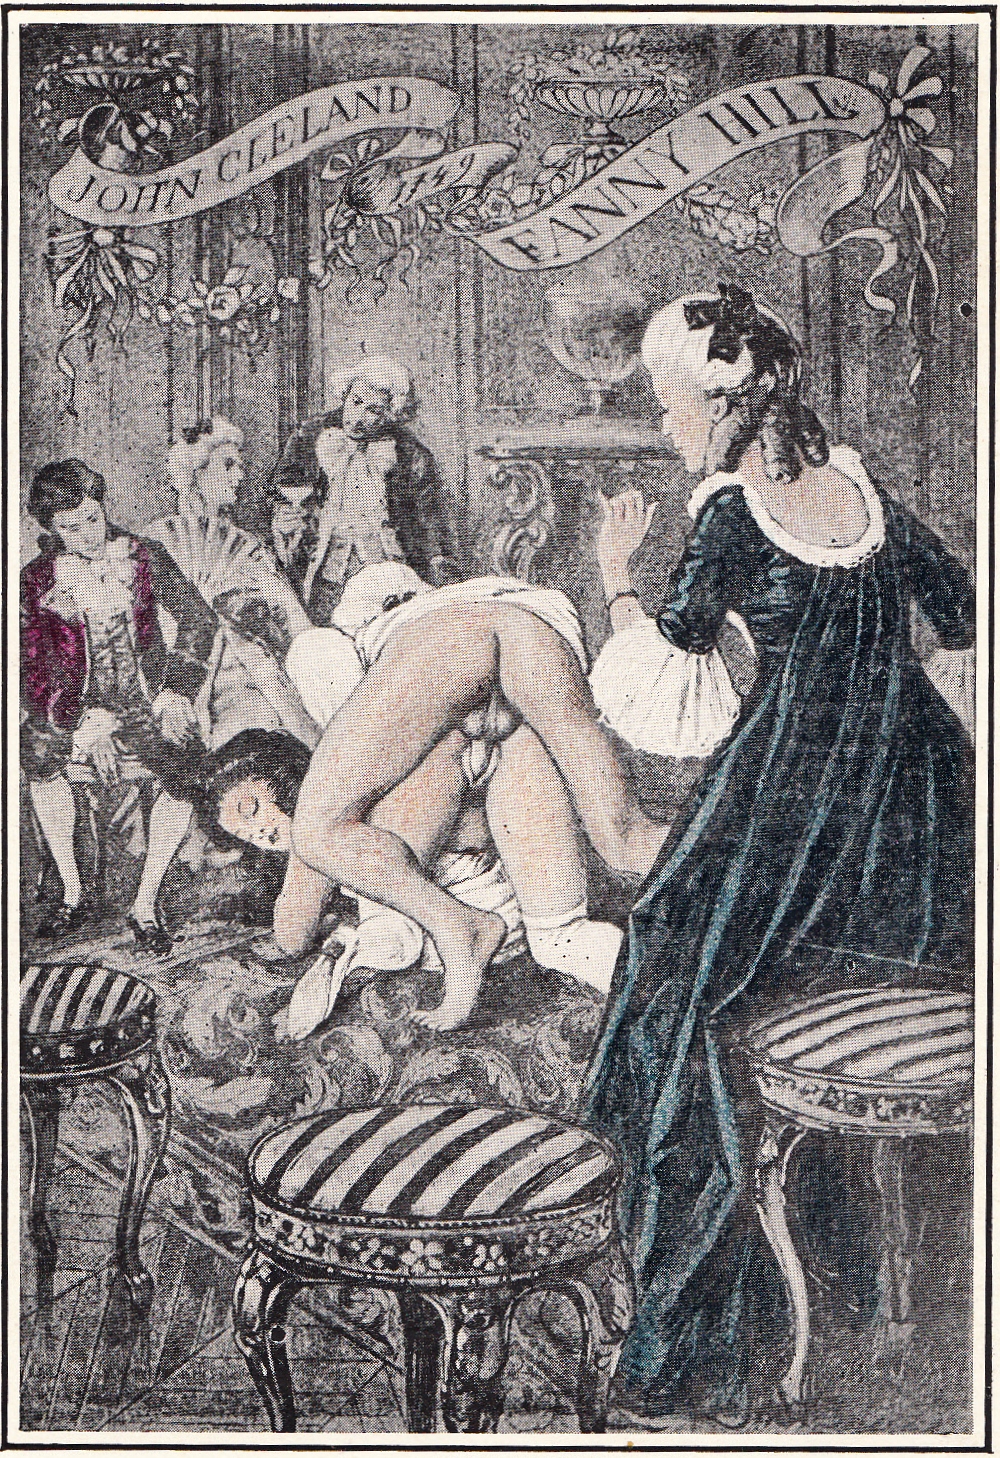 18th Century Sexuality - Fanny Hill - Memoirs of a Woman of Pleasure' Covers and ...